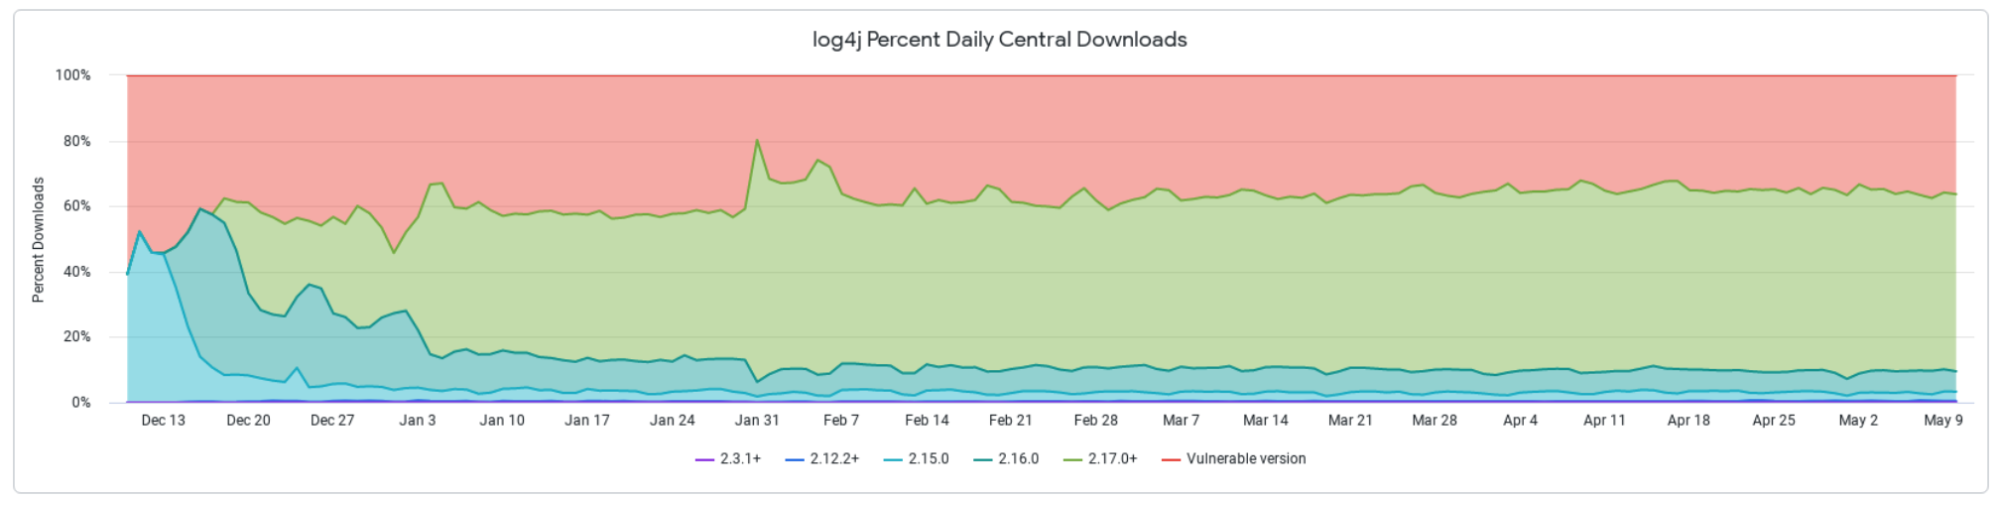 A graph depicting the daily central download percentage of vulnerable versions of log4j